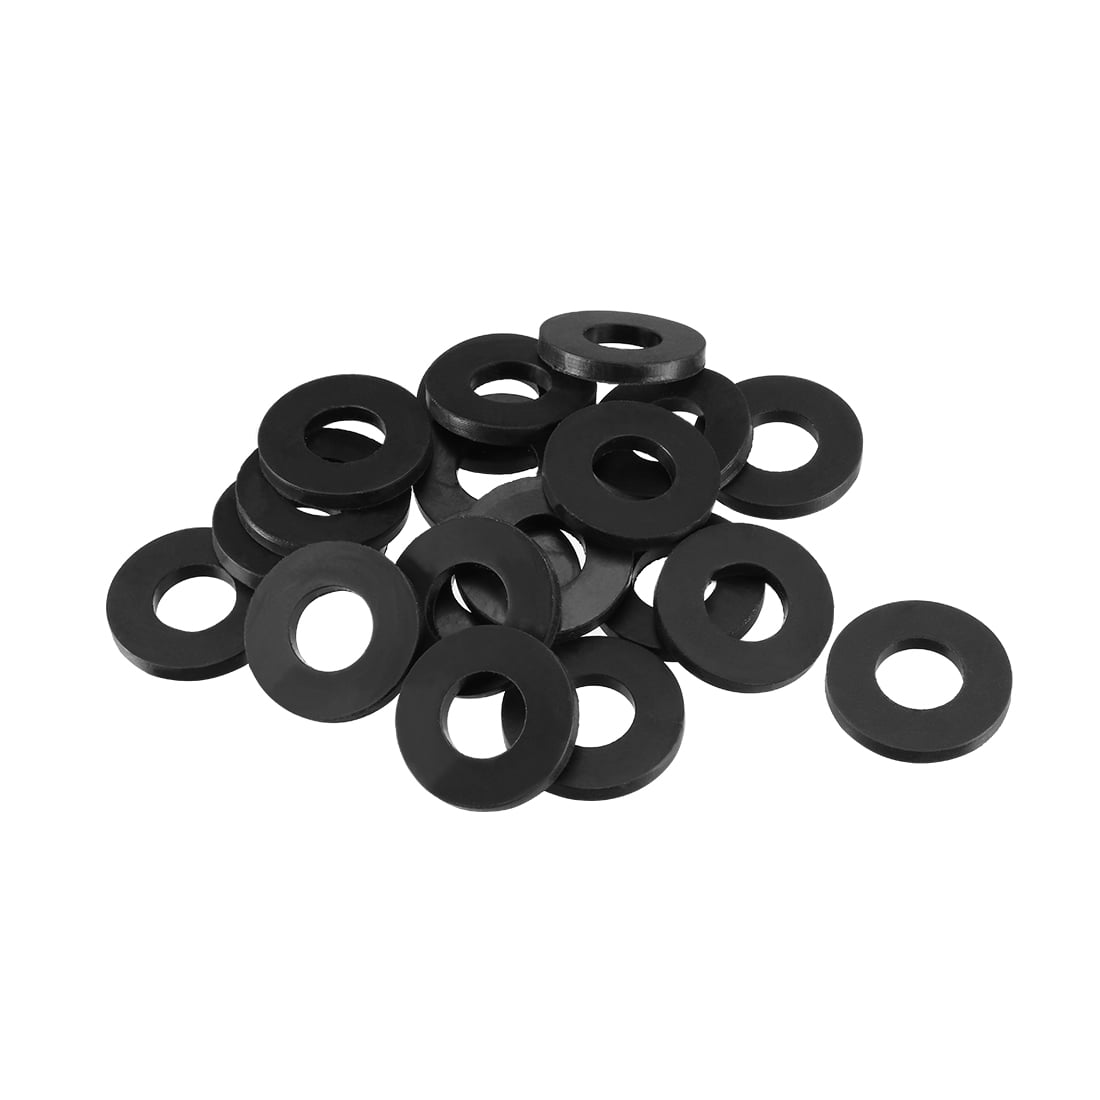 12 x 24 x 3mm O-Ring Hose Gasket Flat Rubber Washer Lot for Faucet Grommet 25pcs 